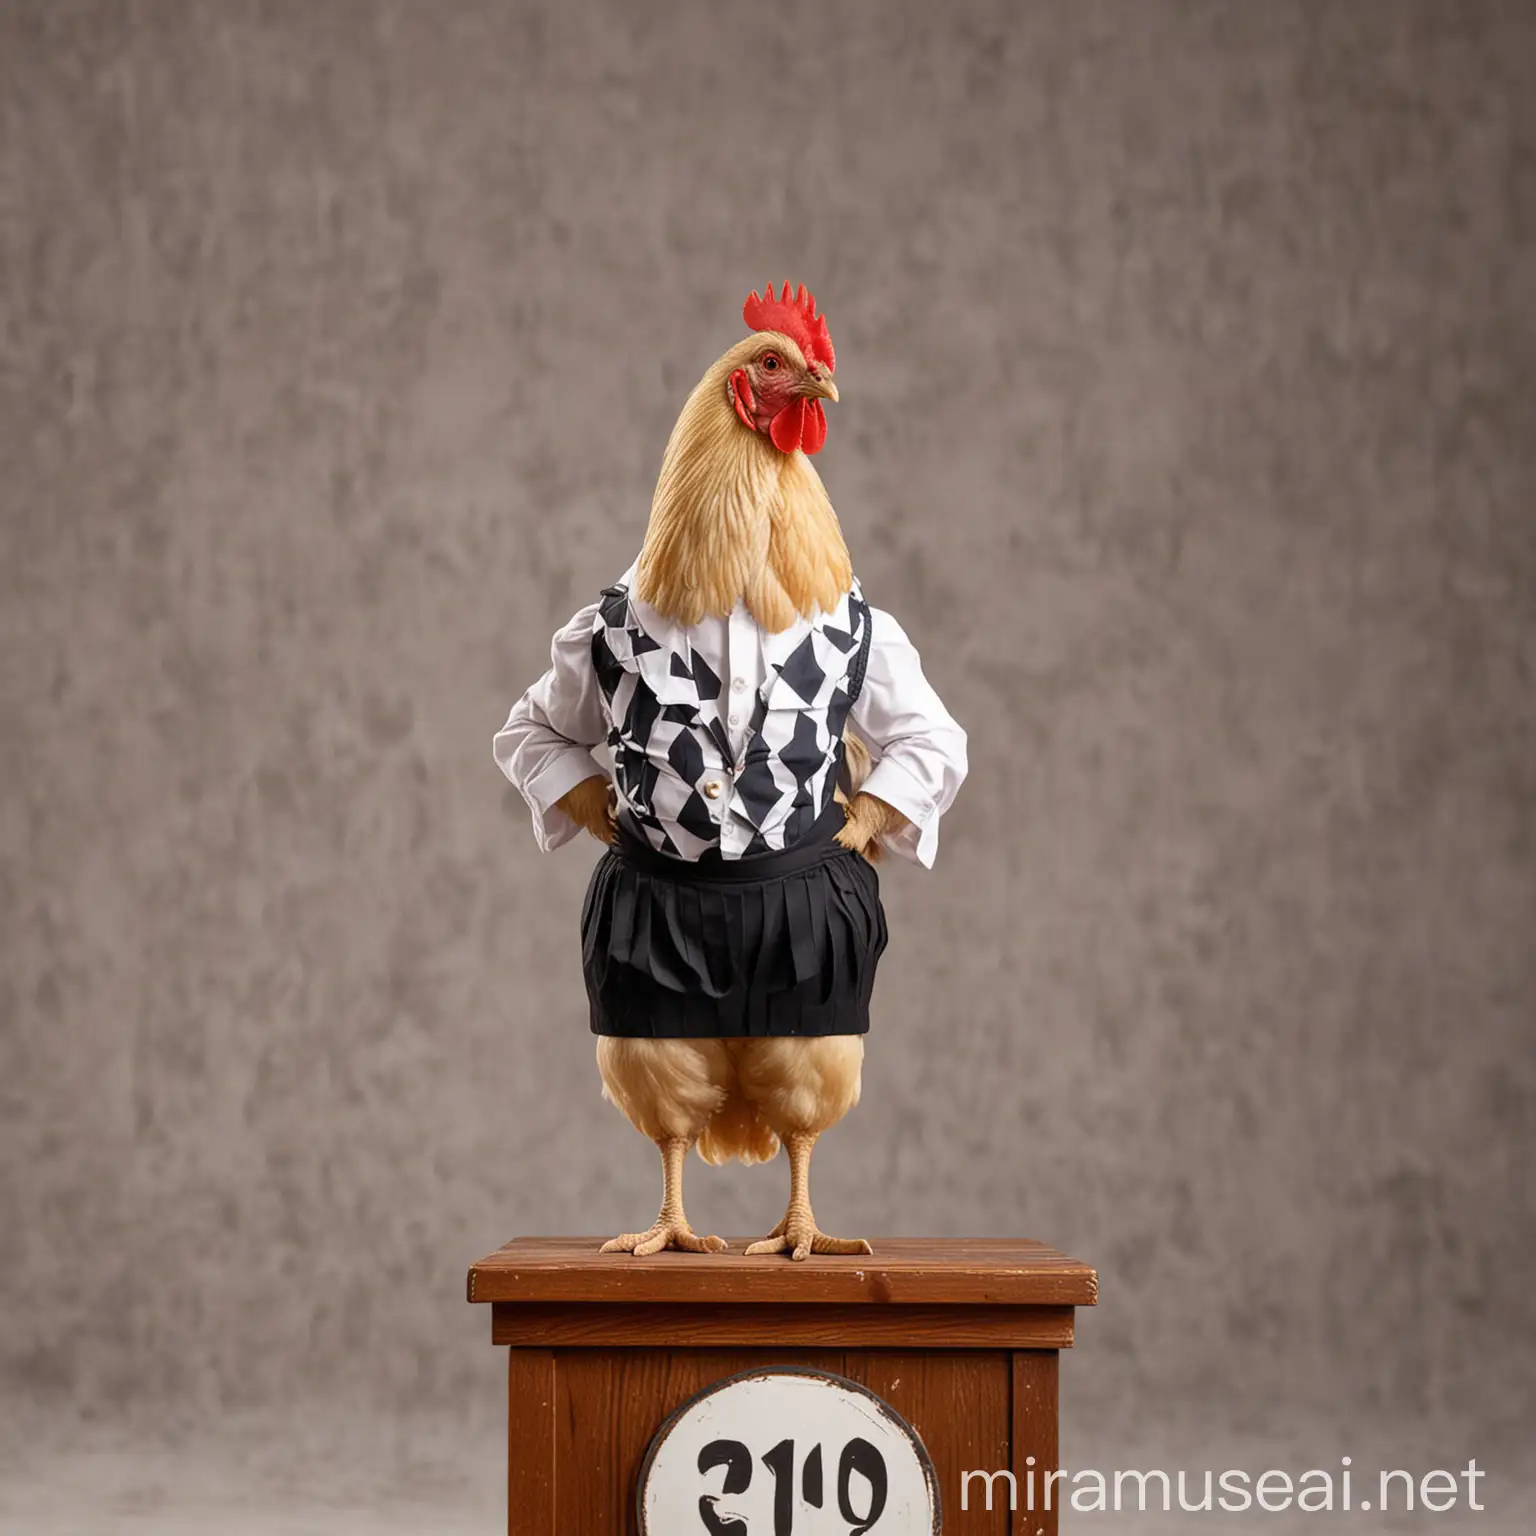 A chicken is standing behind the podium in official clothes and is protesting